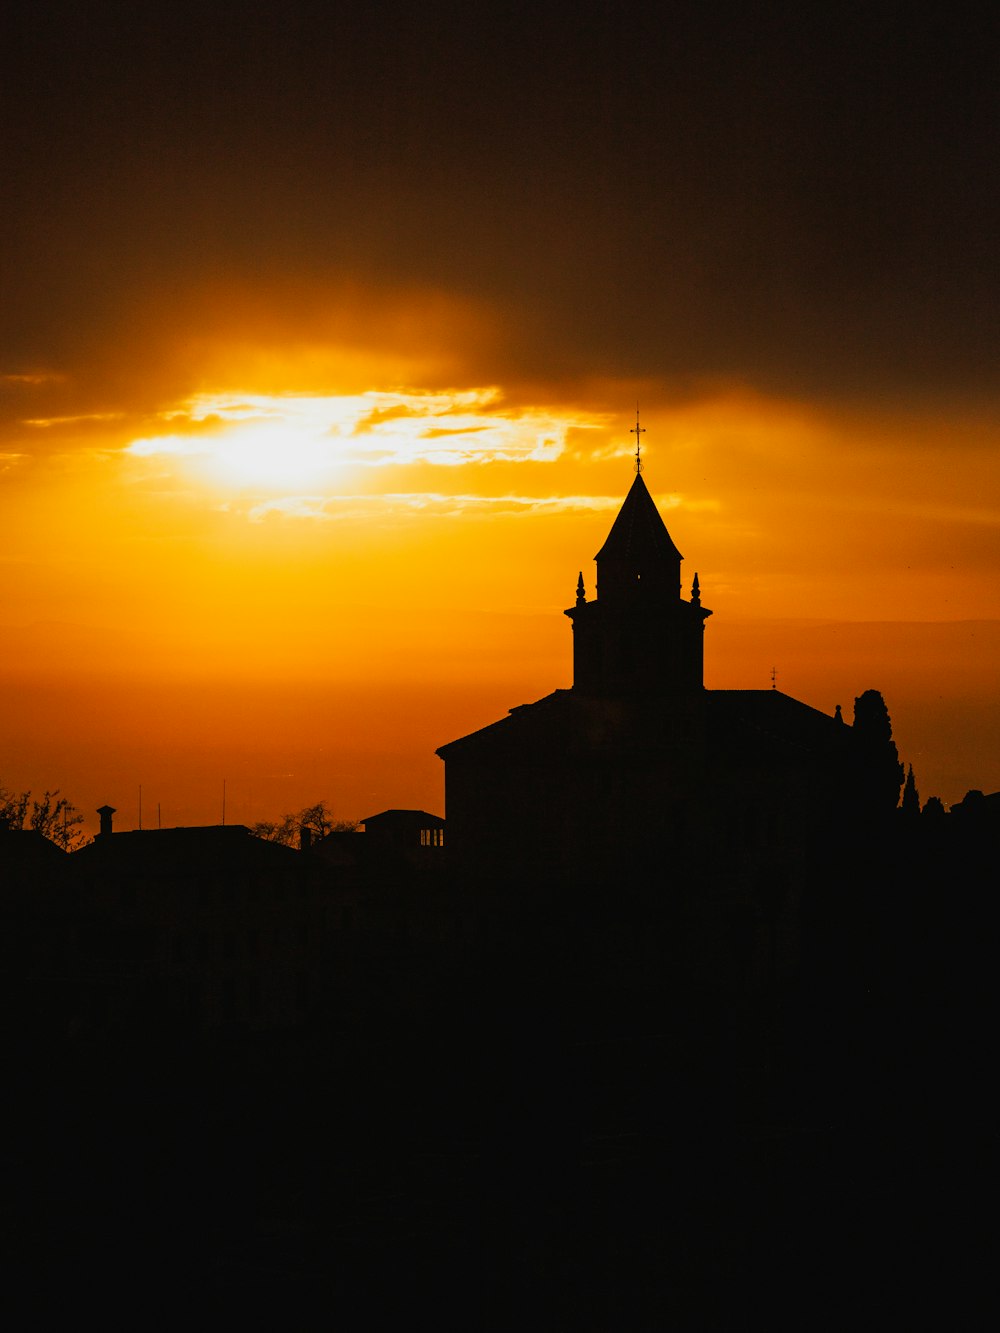 the sun is setting behind a building with a steeple